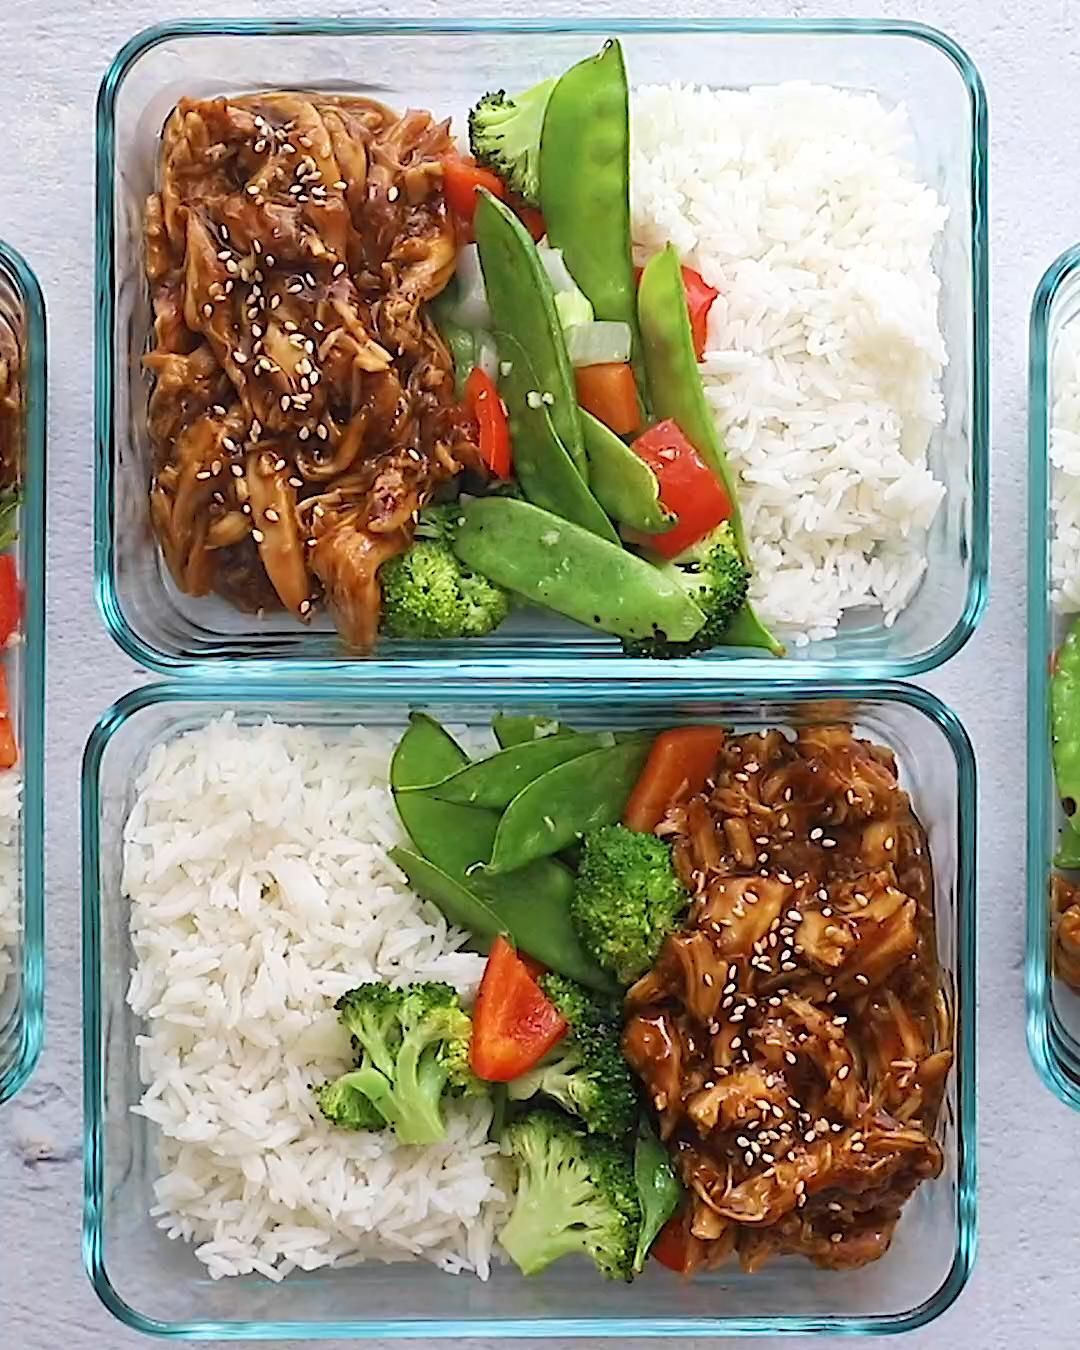 Crock Pot Teriyaki Chicken - Meal Prep Recipes -   18 meal prep recipes healthy work lunches ideas